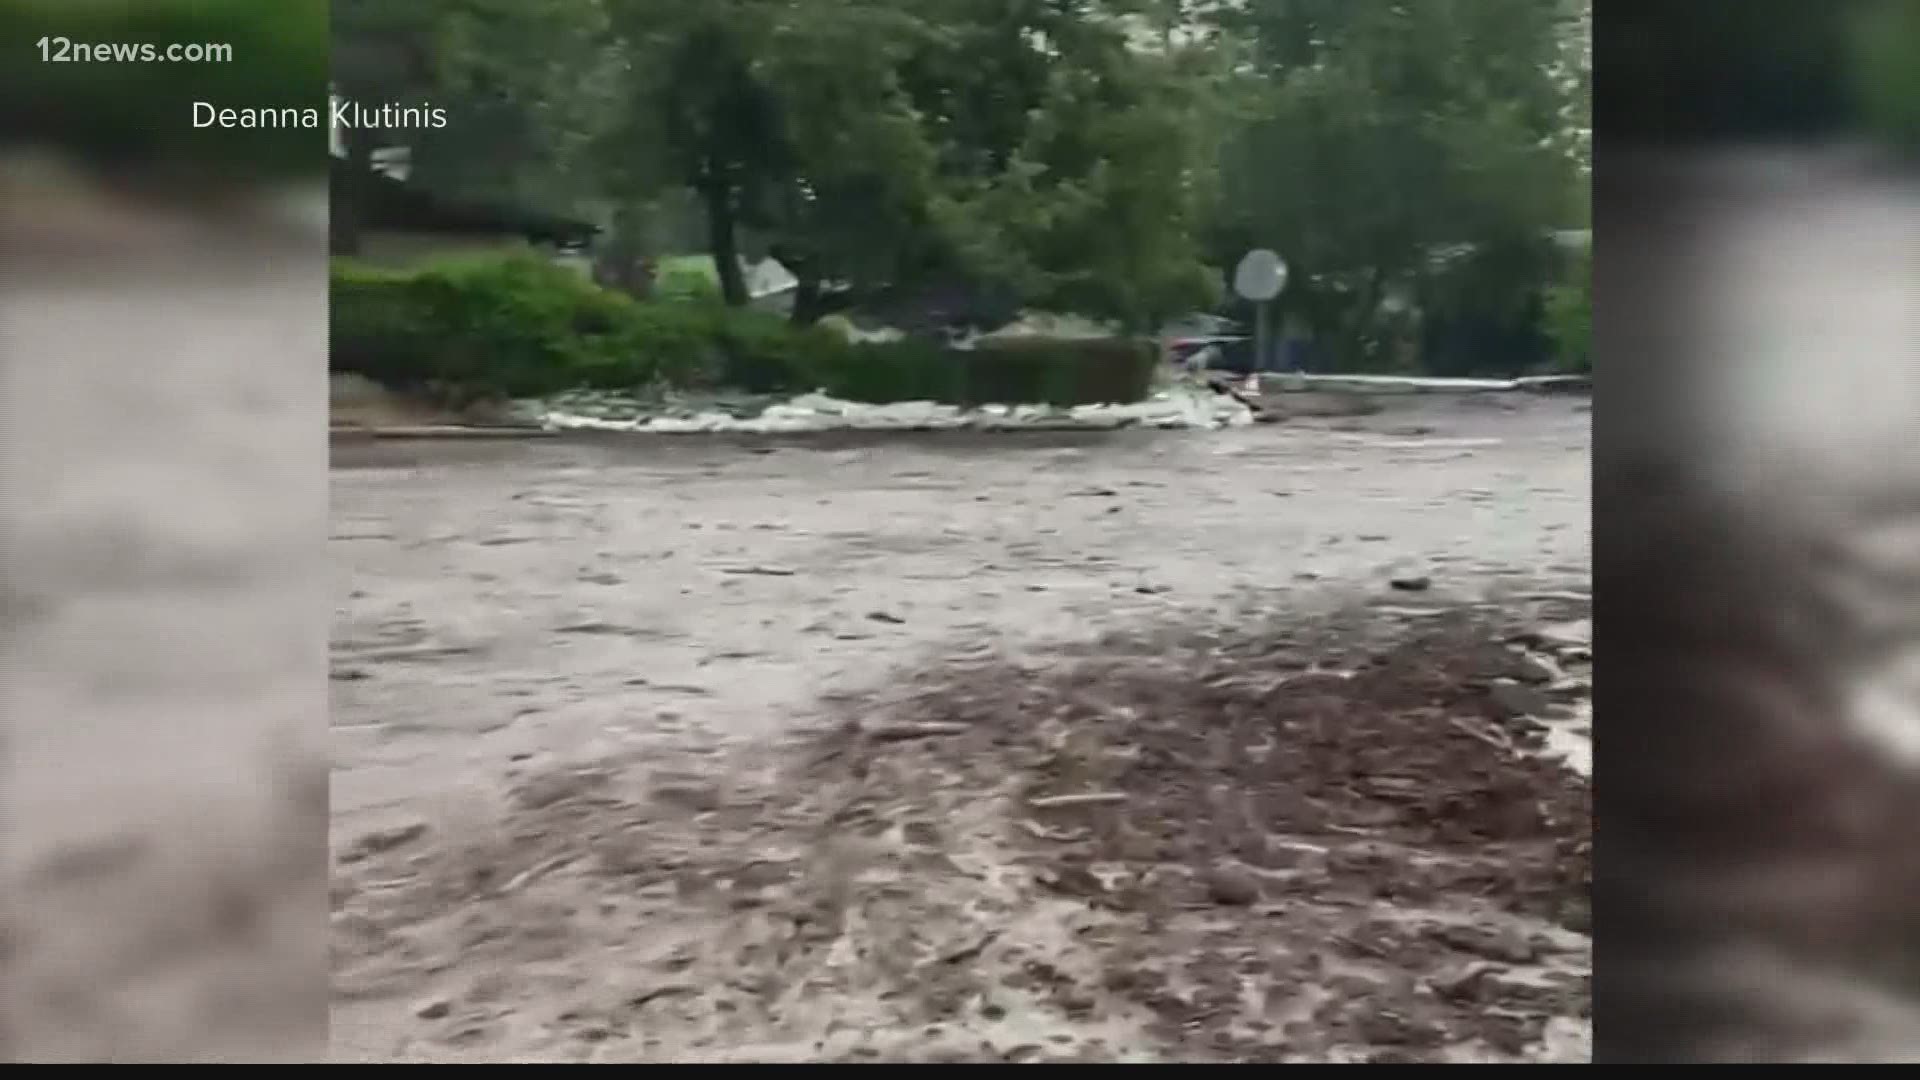 Flagstaff is dealing with flooding from the Museum Fire burn scar that burned on the outskirts of town in 2019. Debris, water and mud poured into the streets.